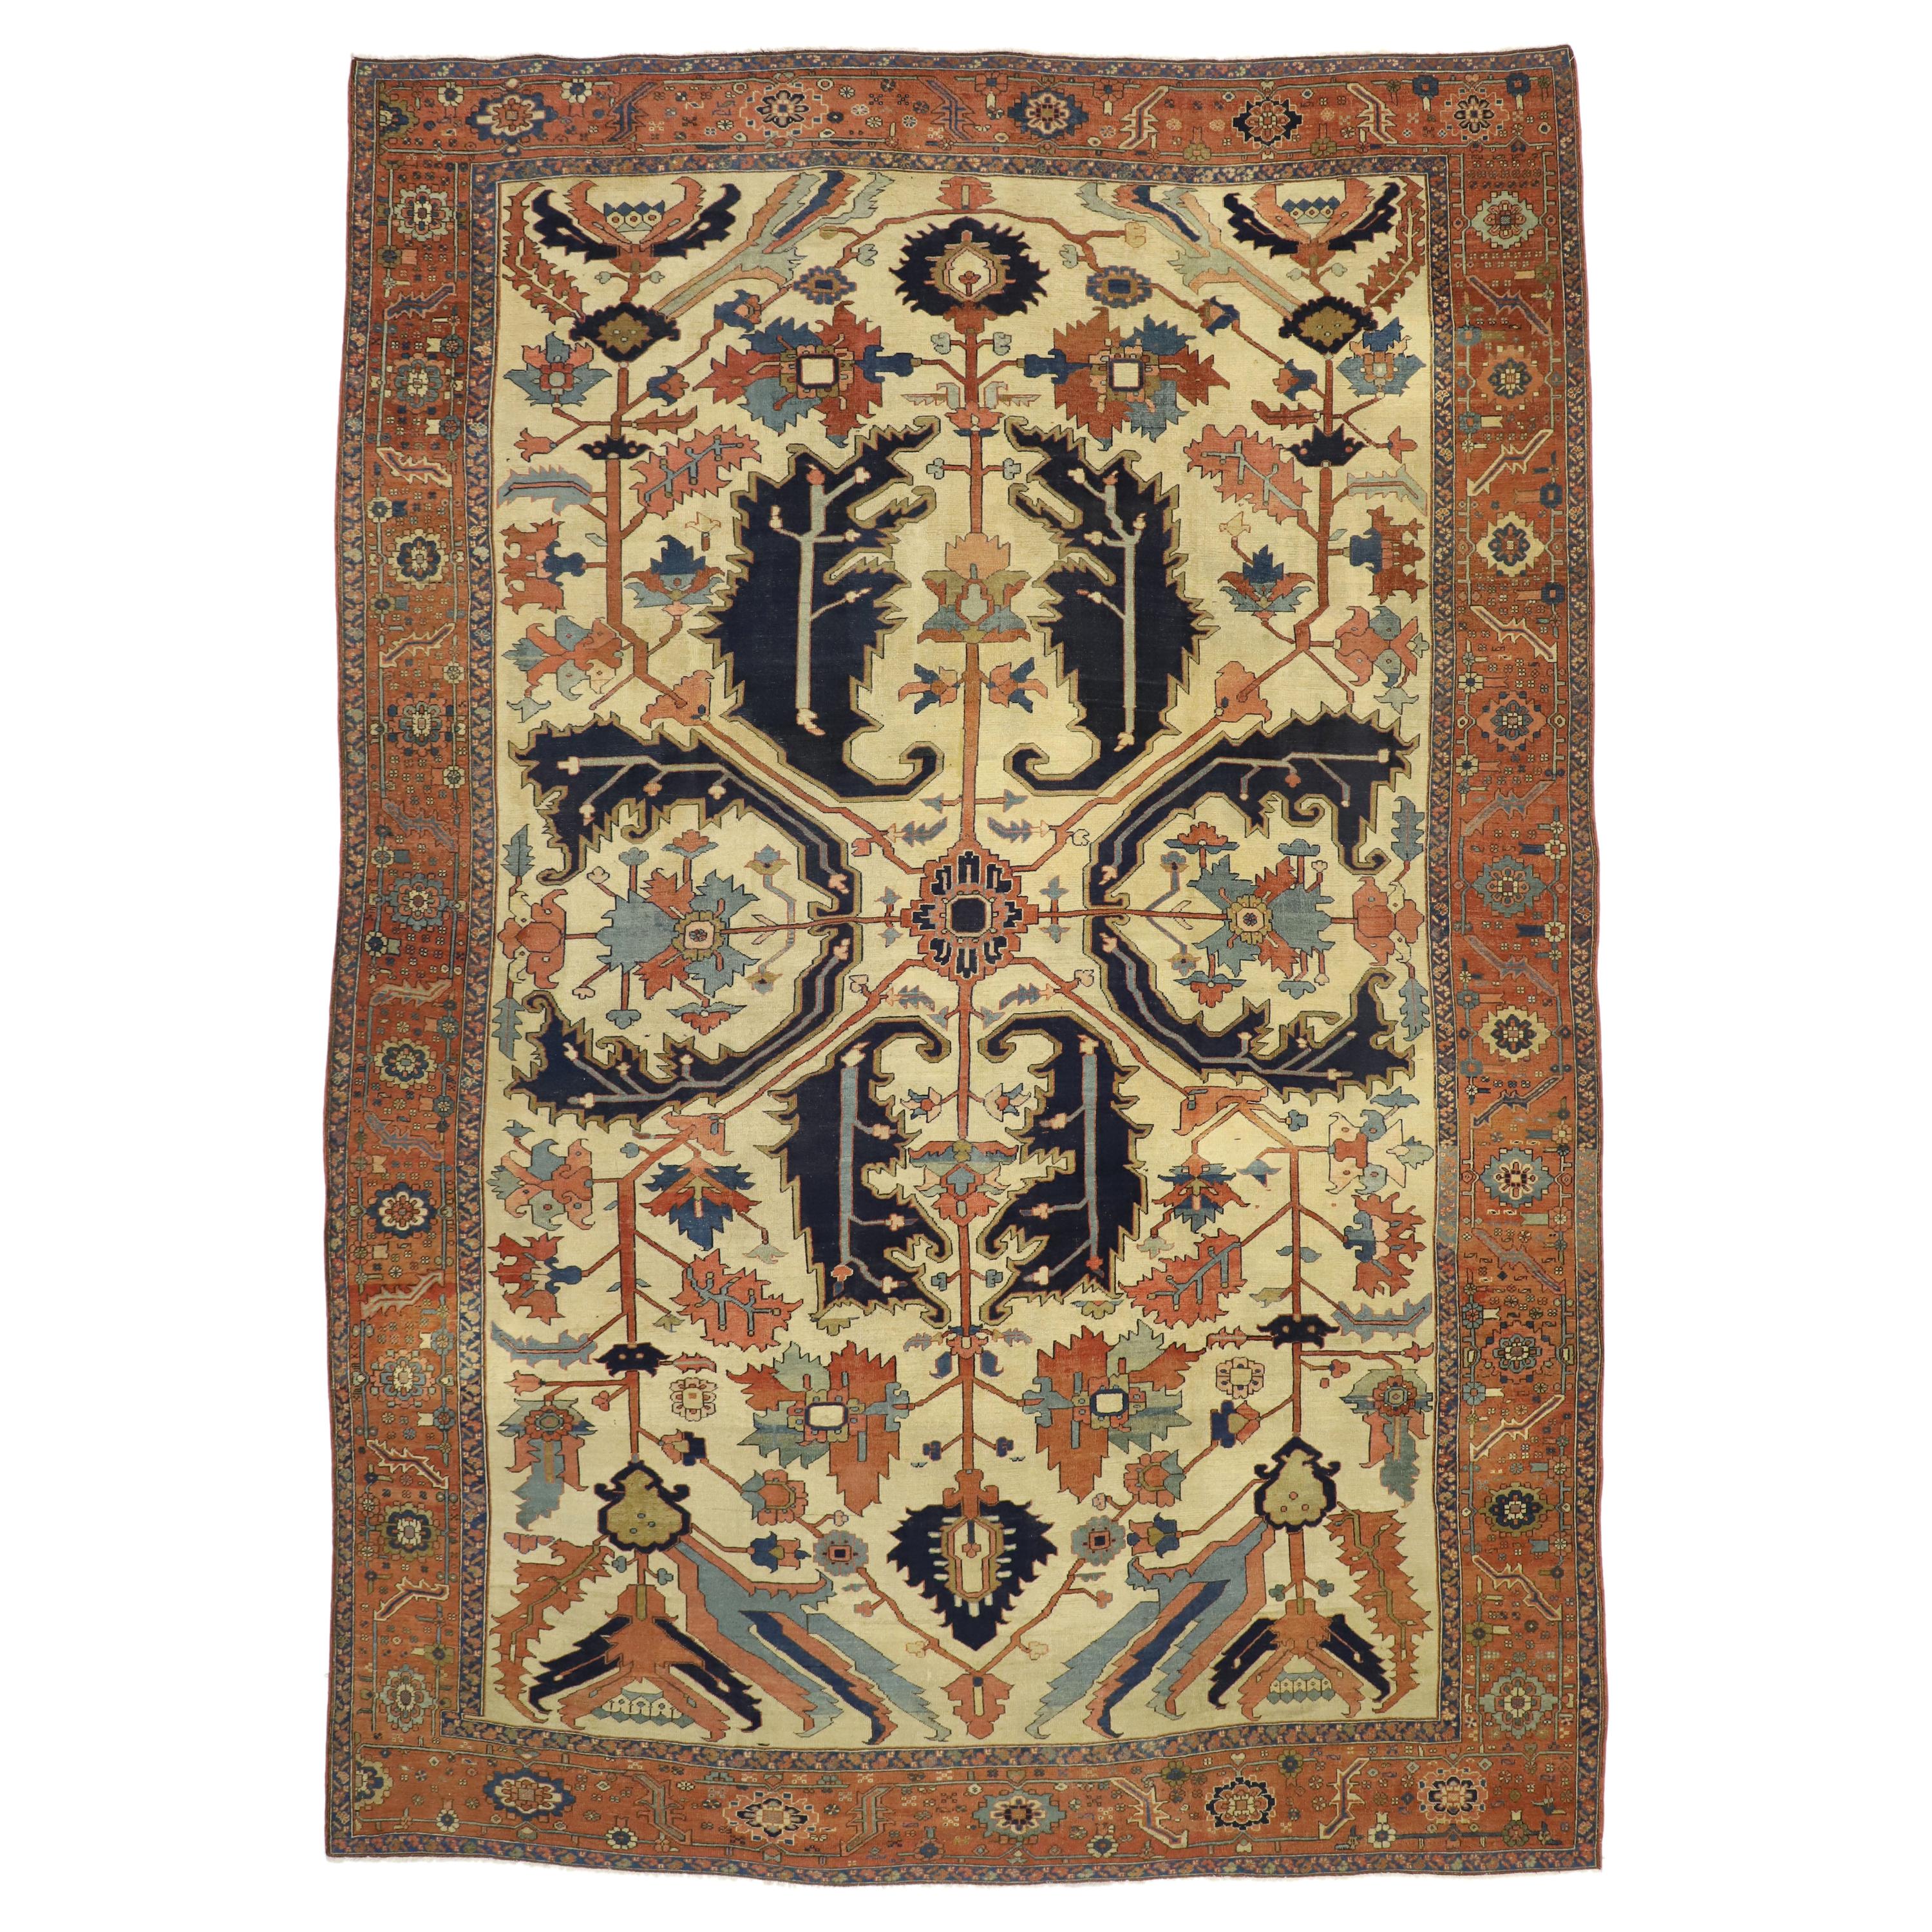 1880s Antique Persian Serapi Rug, Timeless Elegance Meets Relaxed Refinement